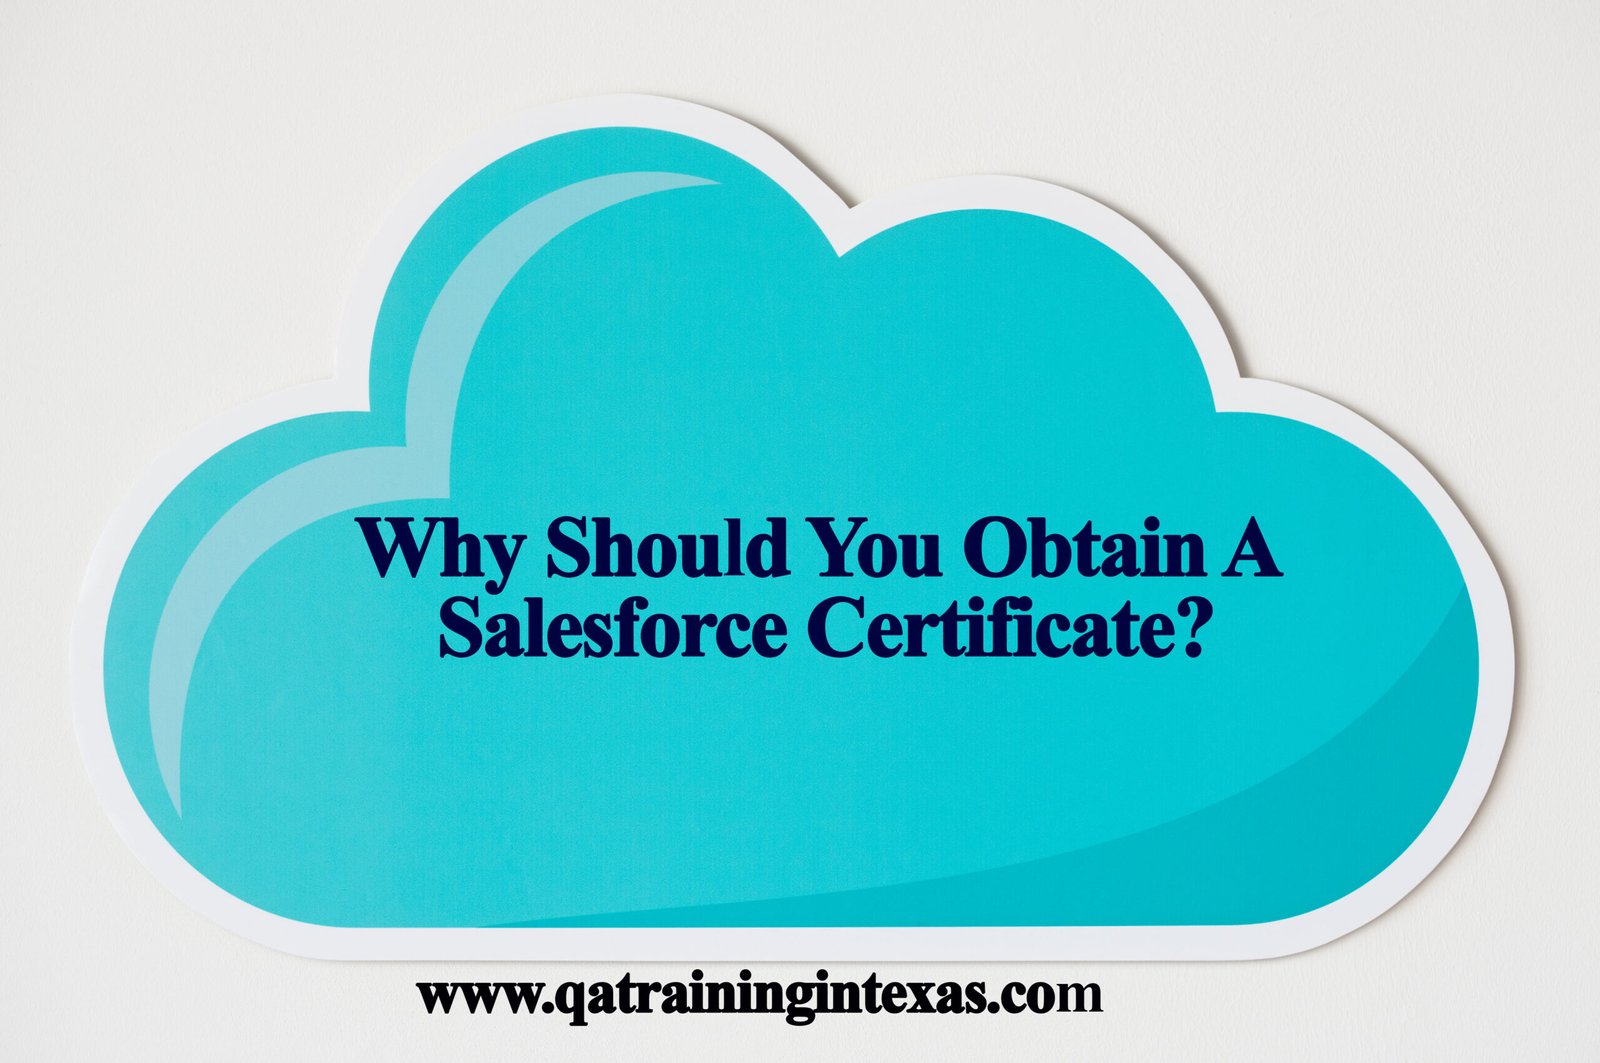 Why Should You Obtain A Salesforce Certificate?